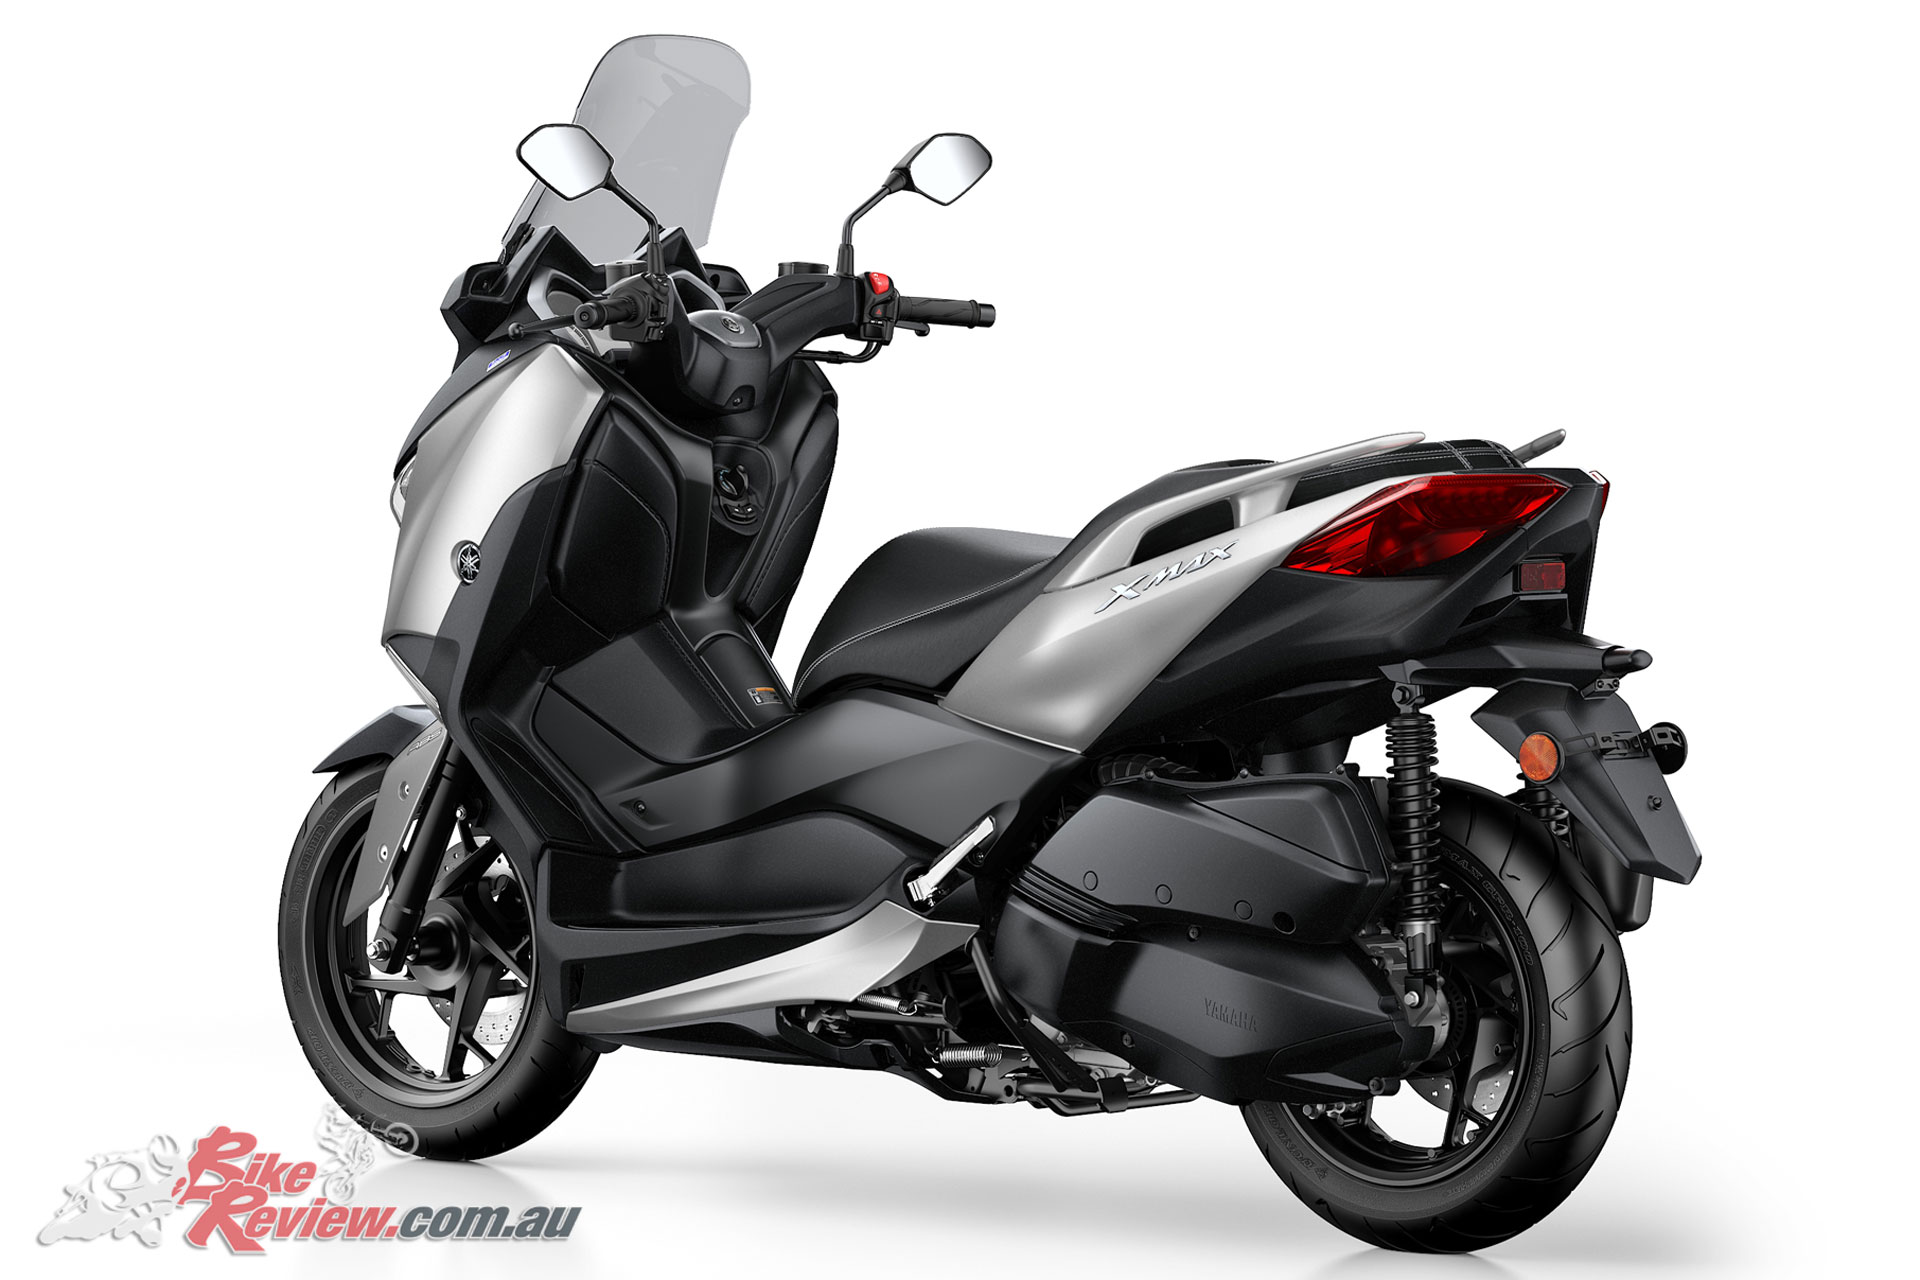 With traction control as standard the XMAX 300 offers a strong blend of performance and technology